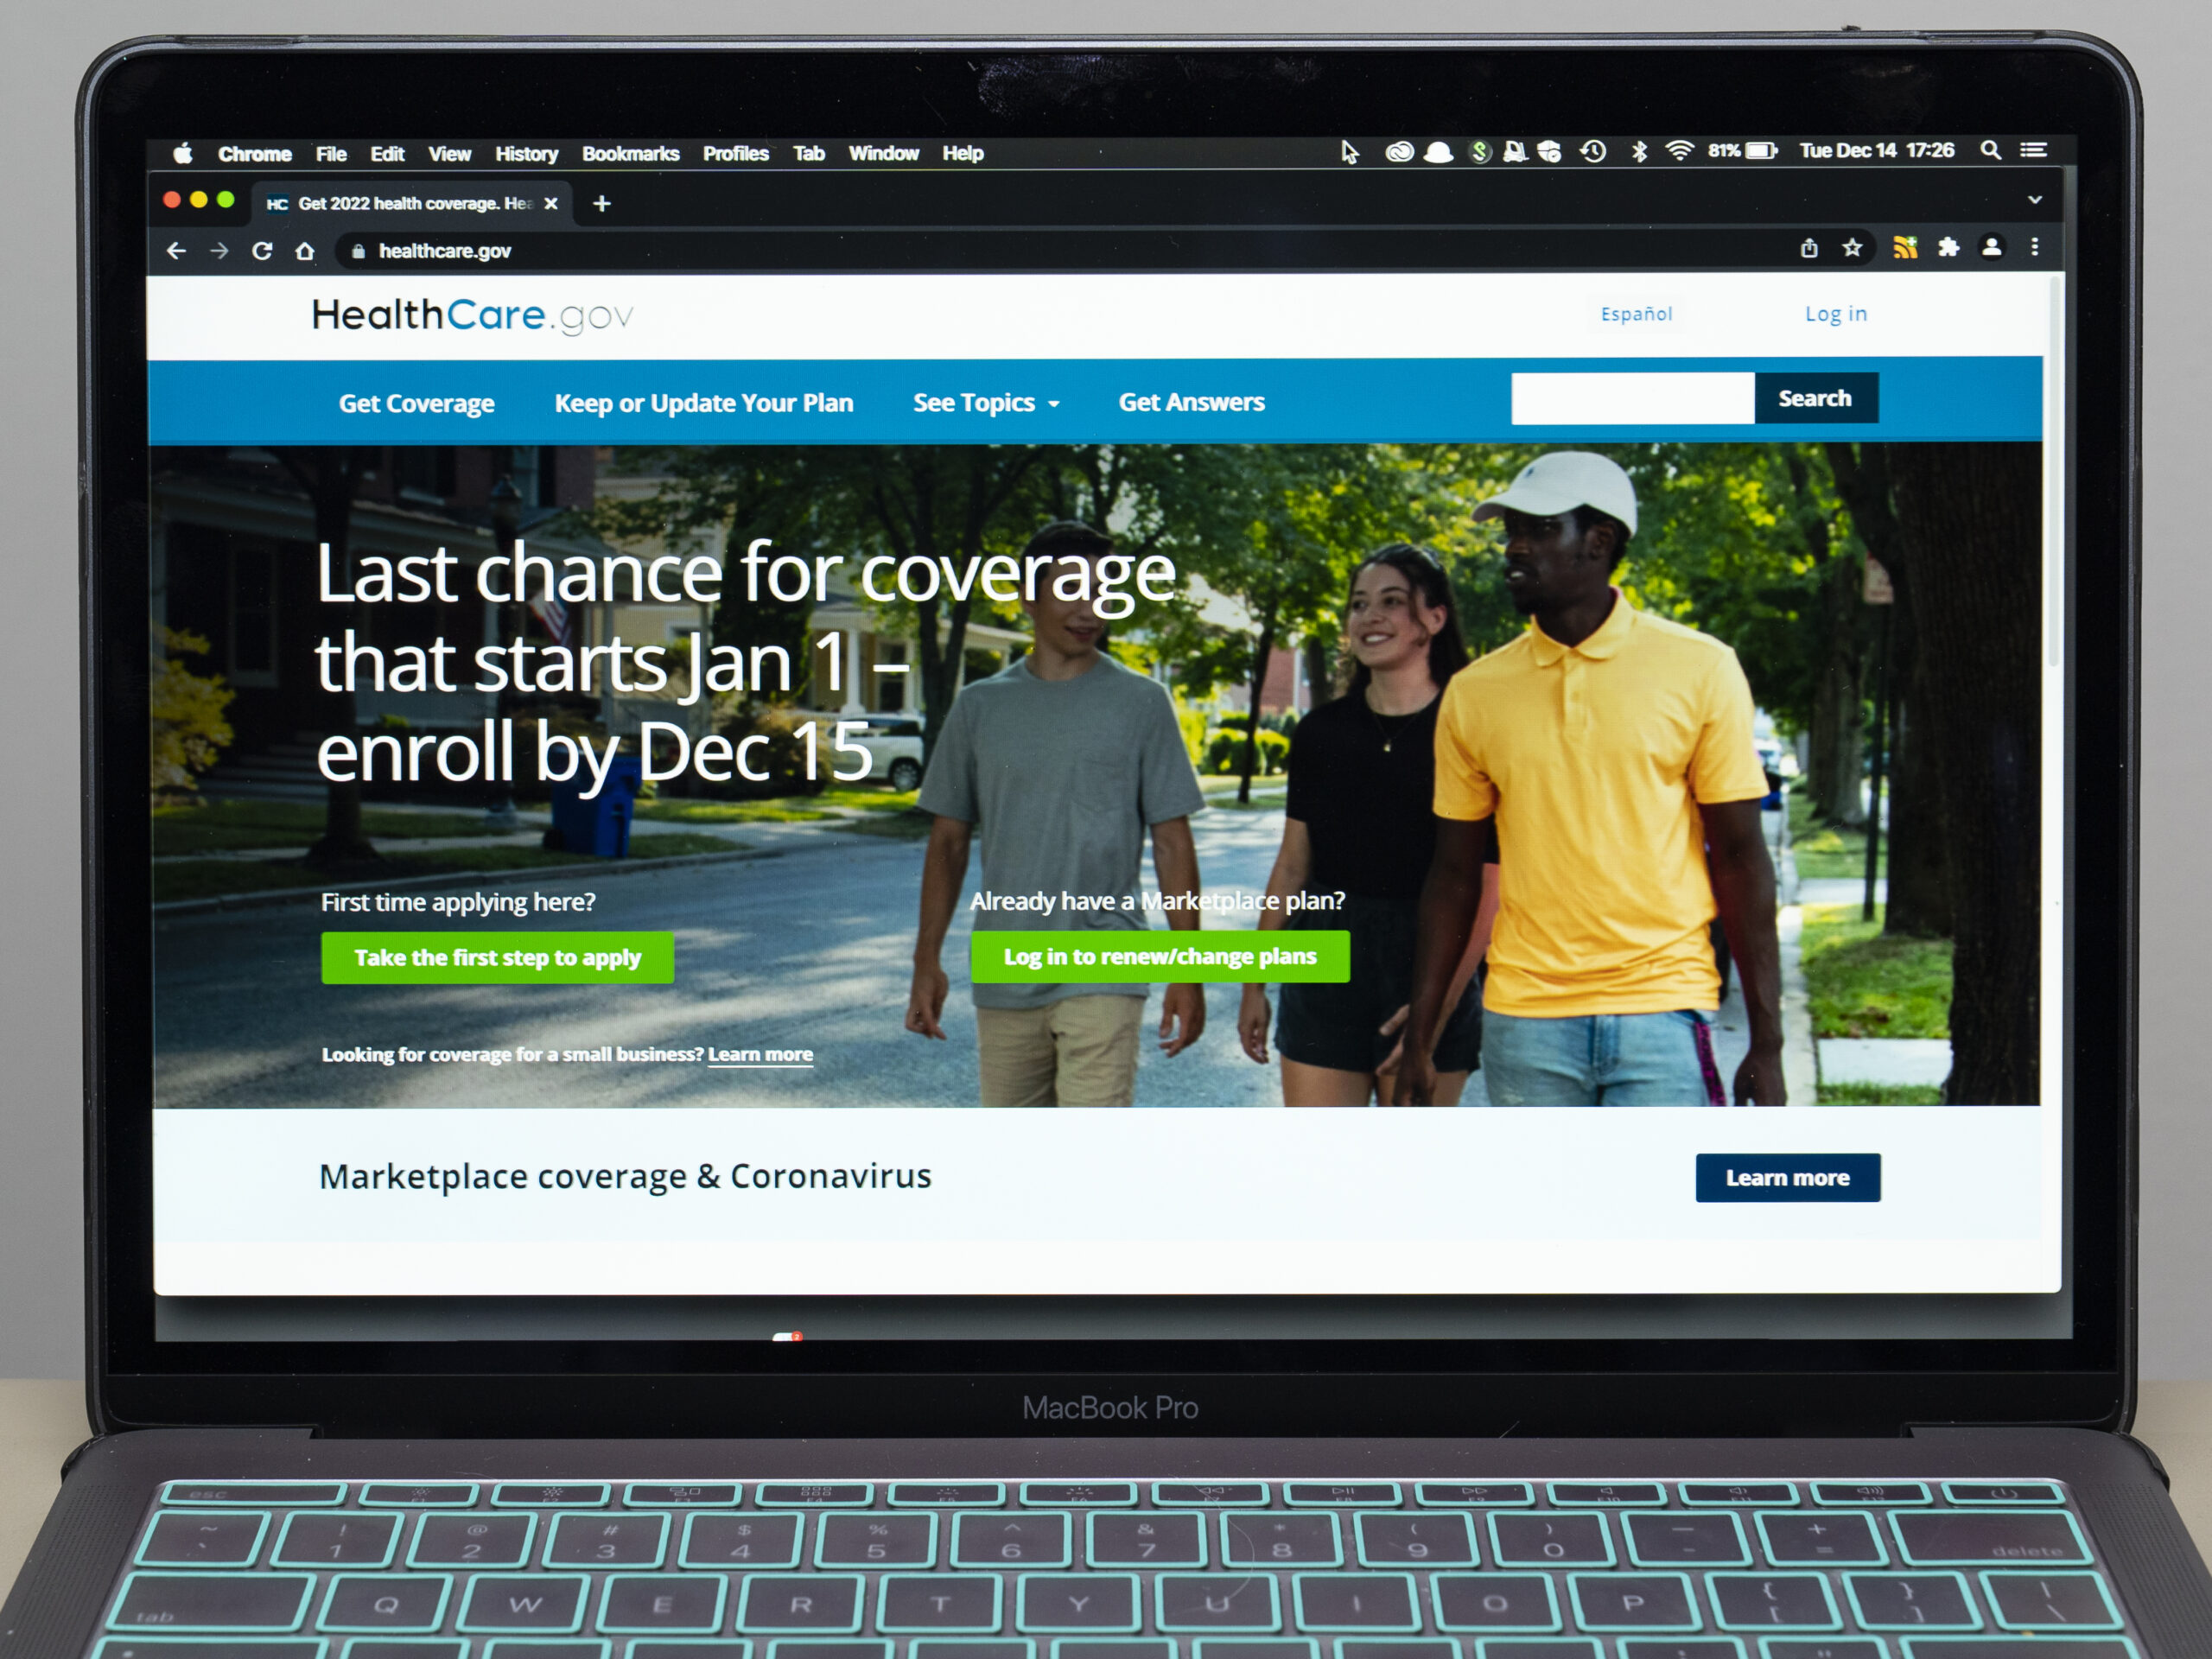 A record number of Americans are getting health insurance through the Affordable Care Act, and states that use the HealthCare.gov marketplace are vulnerable to a scheme where plans are switched without the consumer's permission.